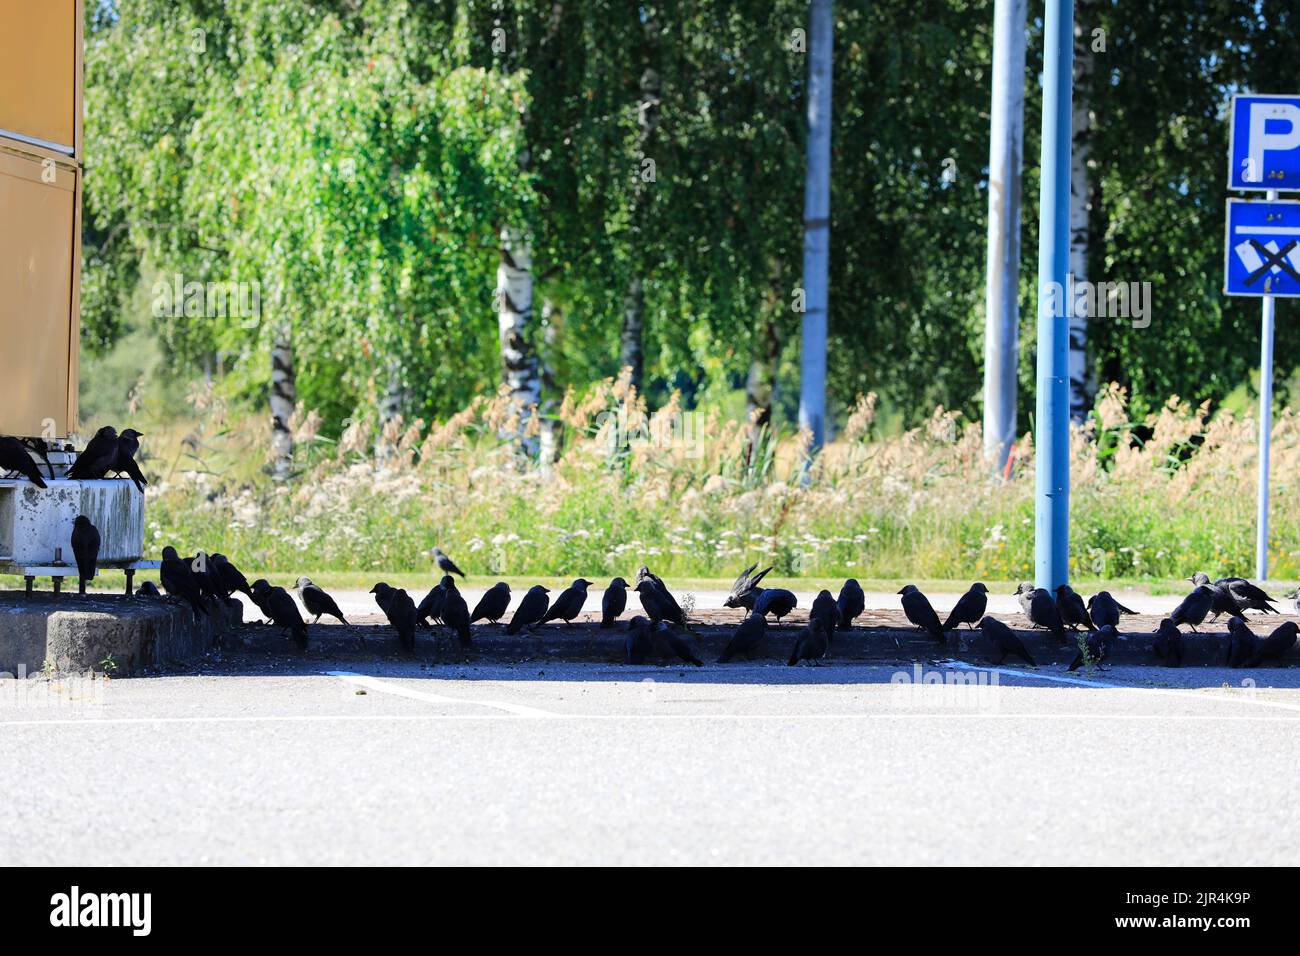 Intelligent Western jackdaws, Coloeus monedula, gather in the shade cast by a pylon to seek shelter from the sun on a very hot, sunny day. Finland. Stock Photo